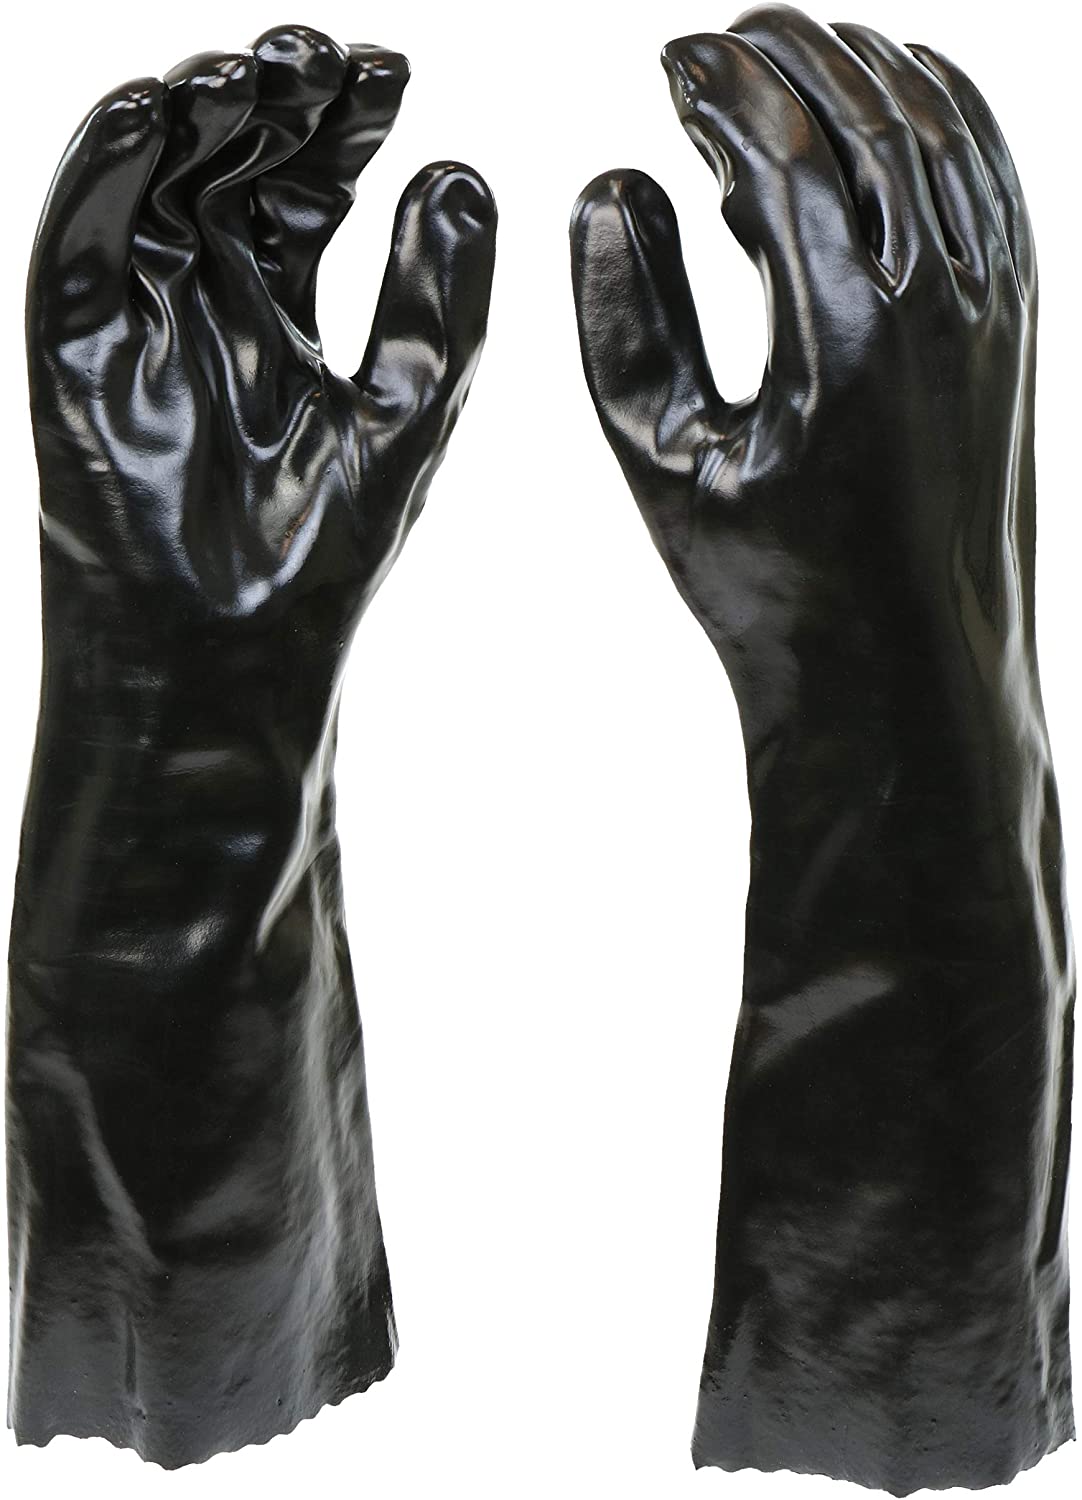 Chemical Resistant PVC Coated Work Gloves: 18" Length, One Size Fits Most, 1 Pair, Black - e4cents